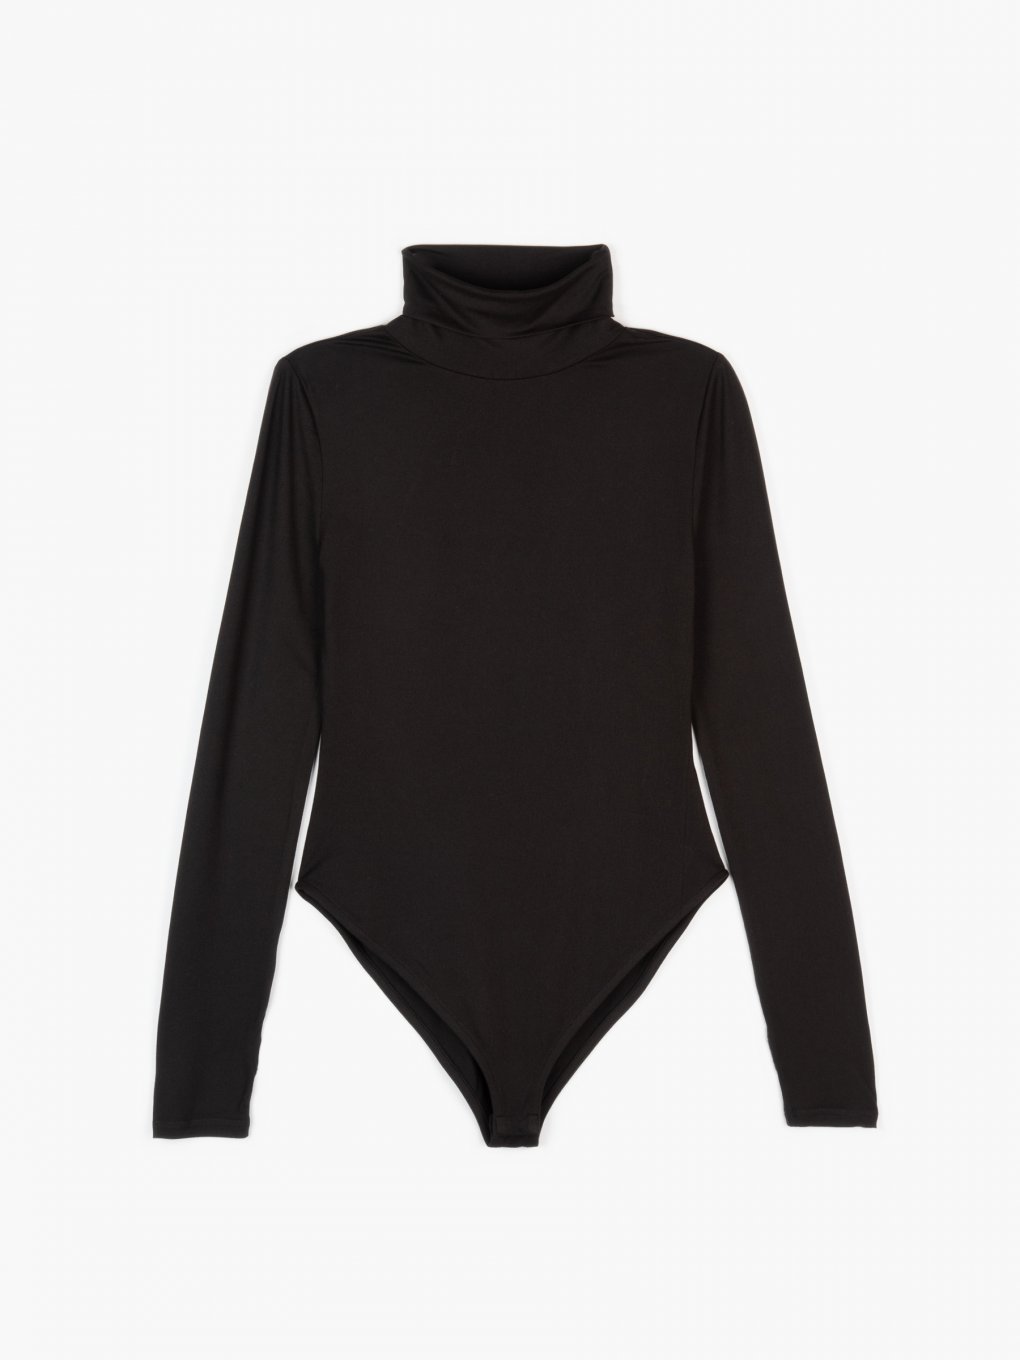 High collar long sleeve bodysuit with thumb hole detail